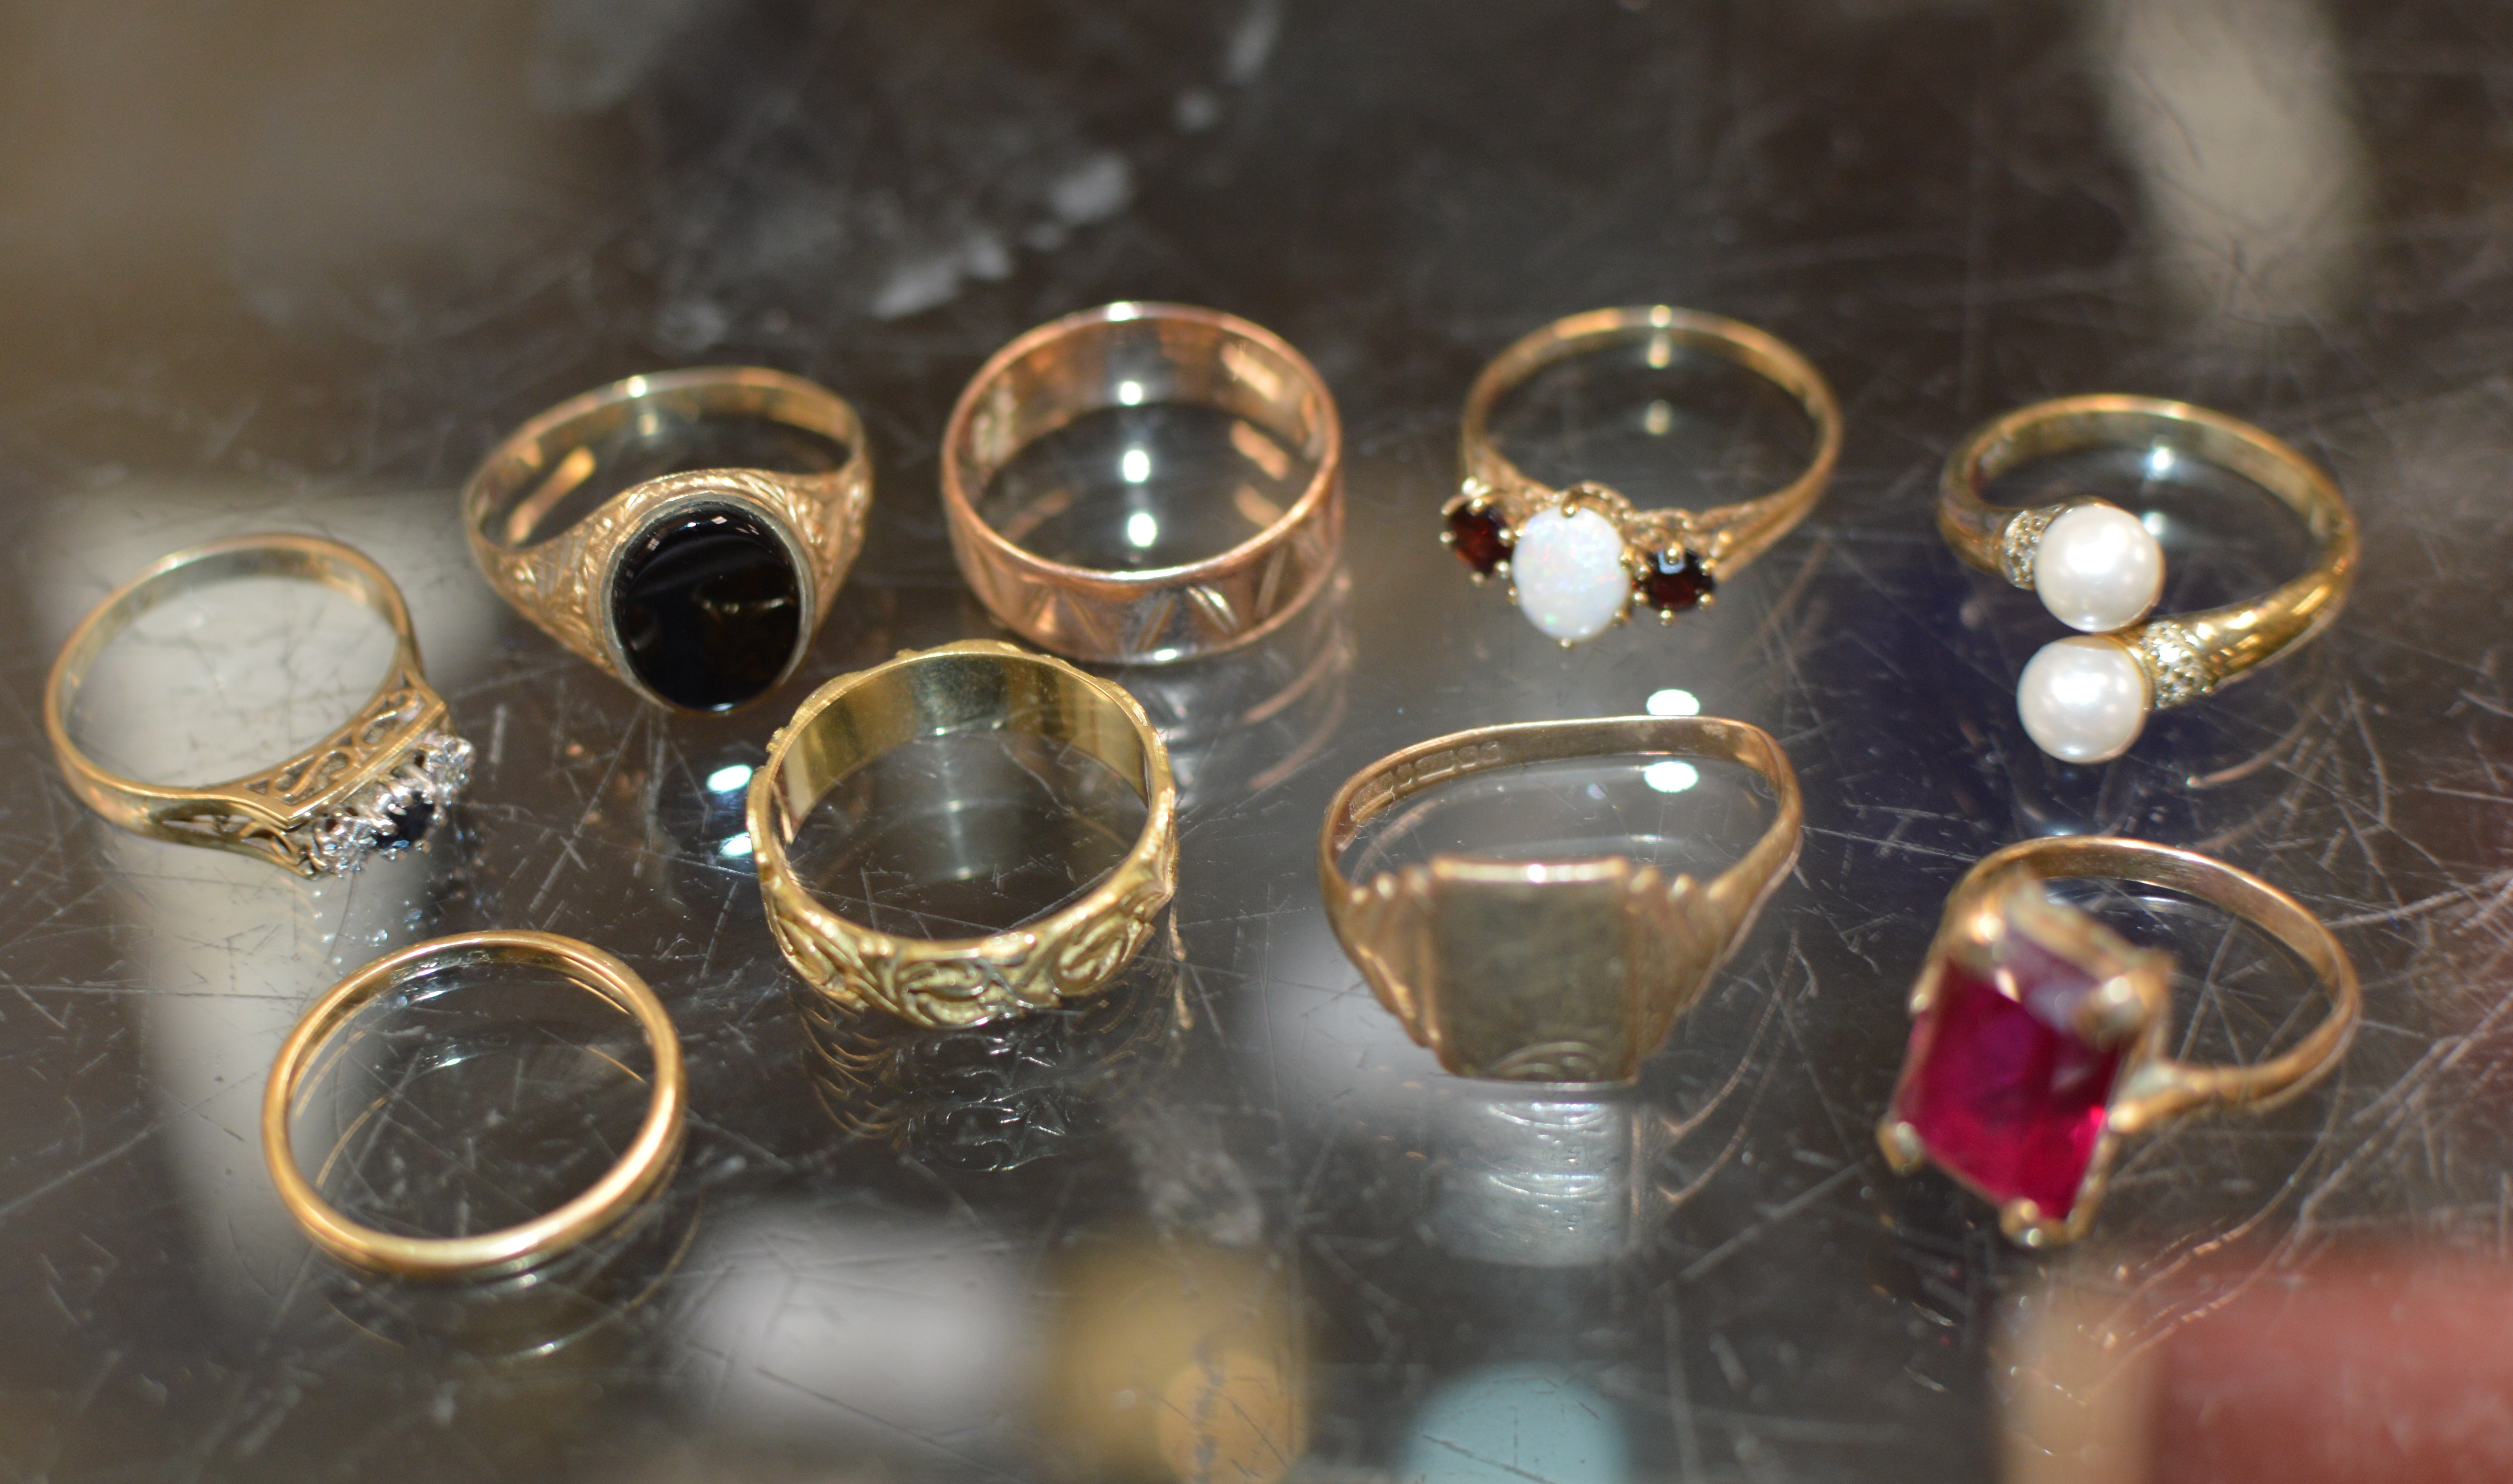 9 VARIOUS 9 CARAT GOLD RINGS - APPROXIMATE COMBINED WEIGHT = 29.4 GRAMS